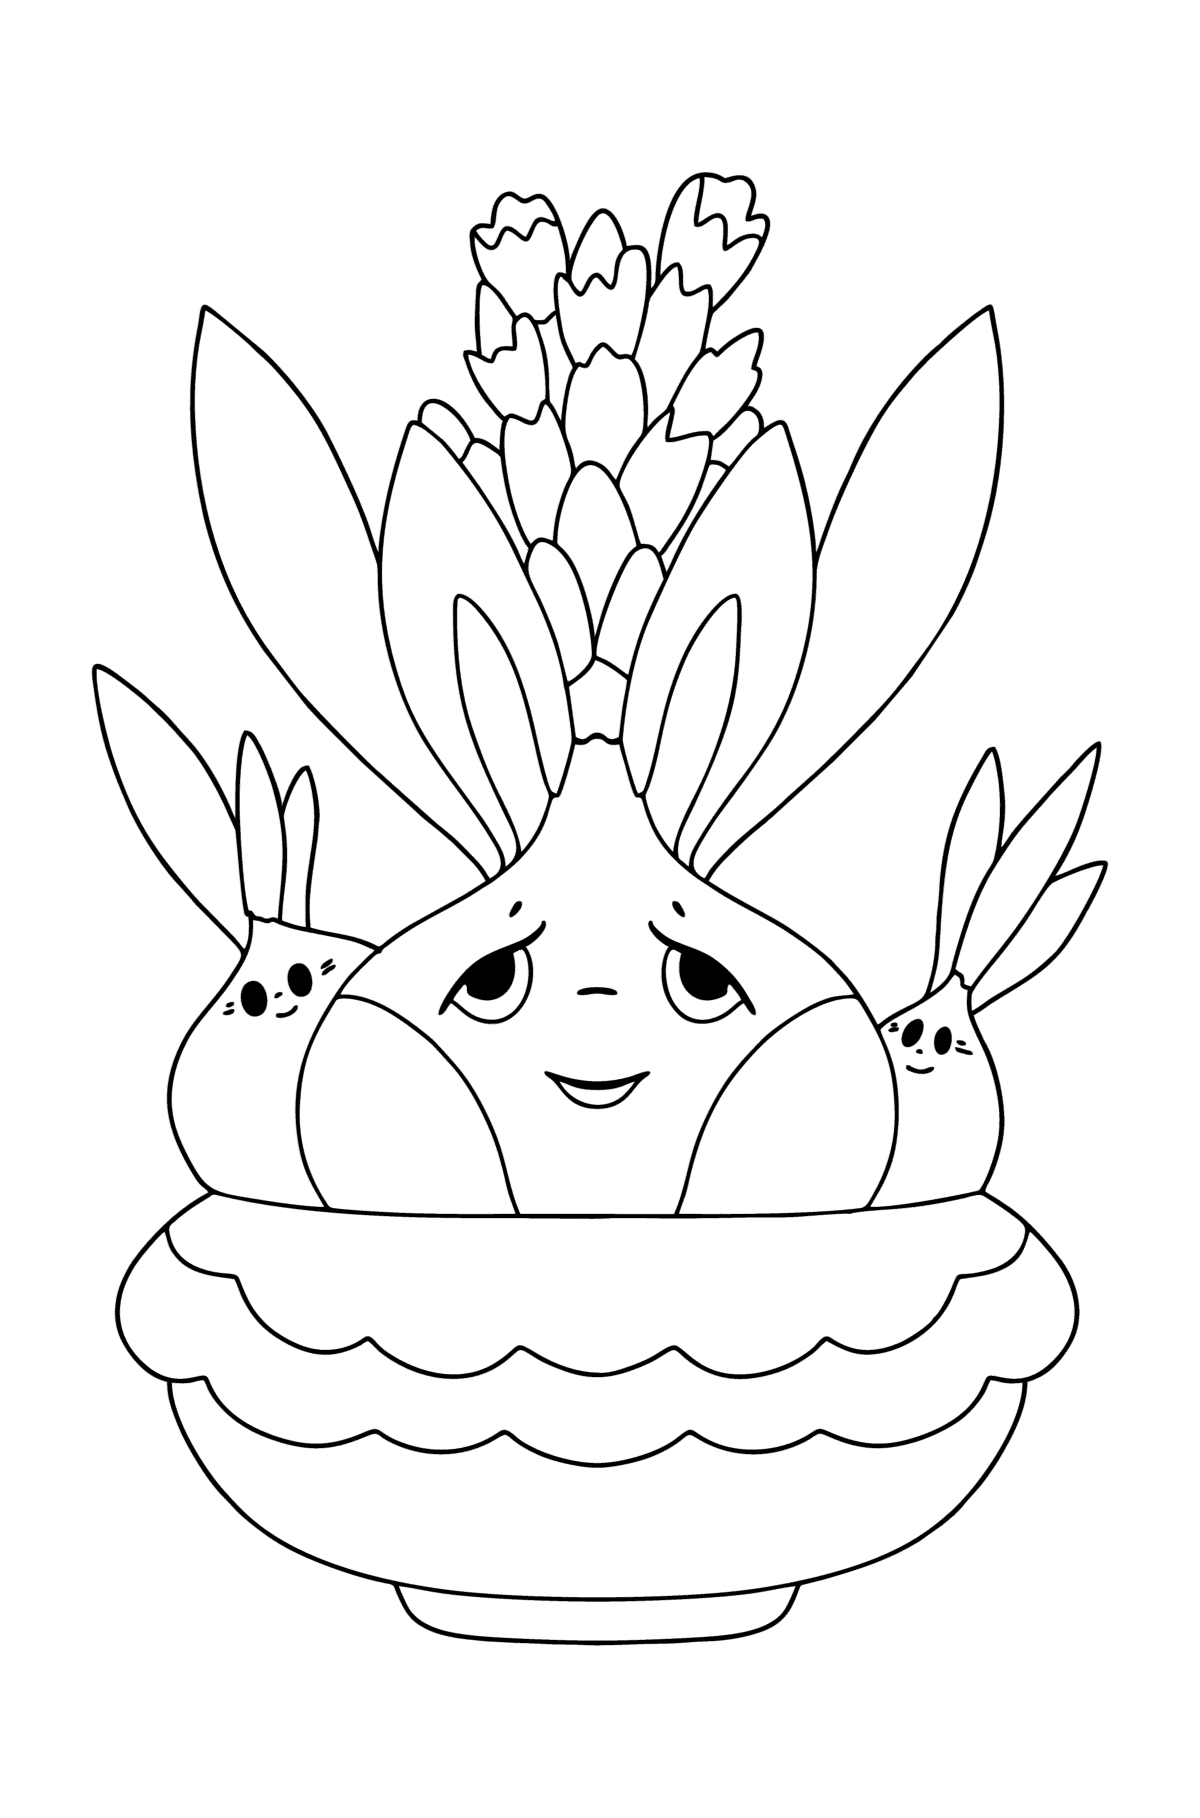 Hyacinth flowers with eyes coloring page - Coloring Pages for Kids